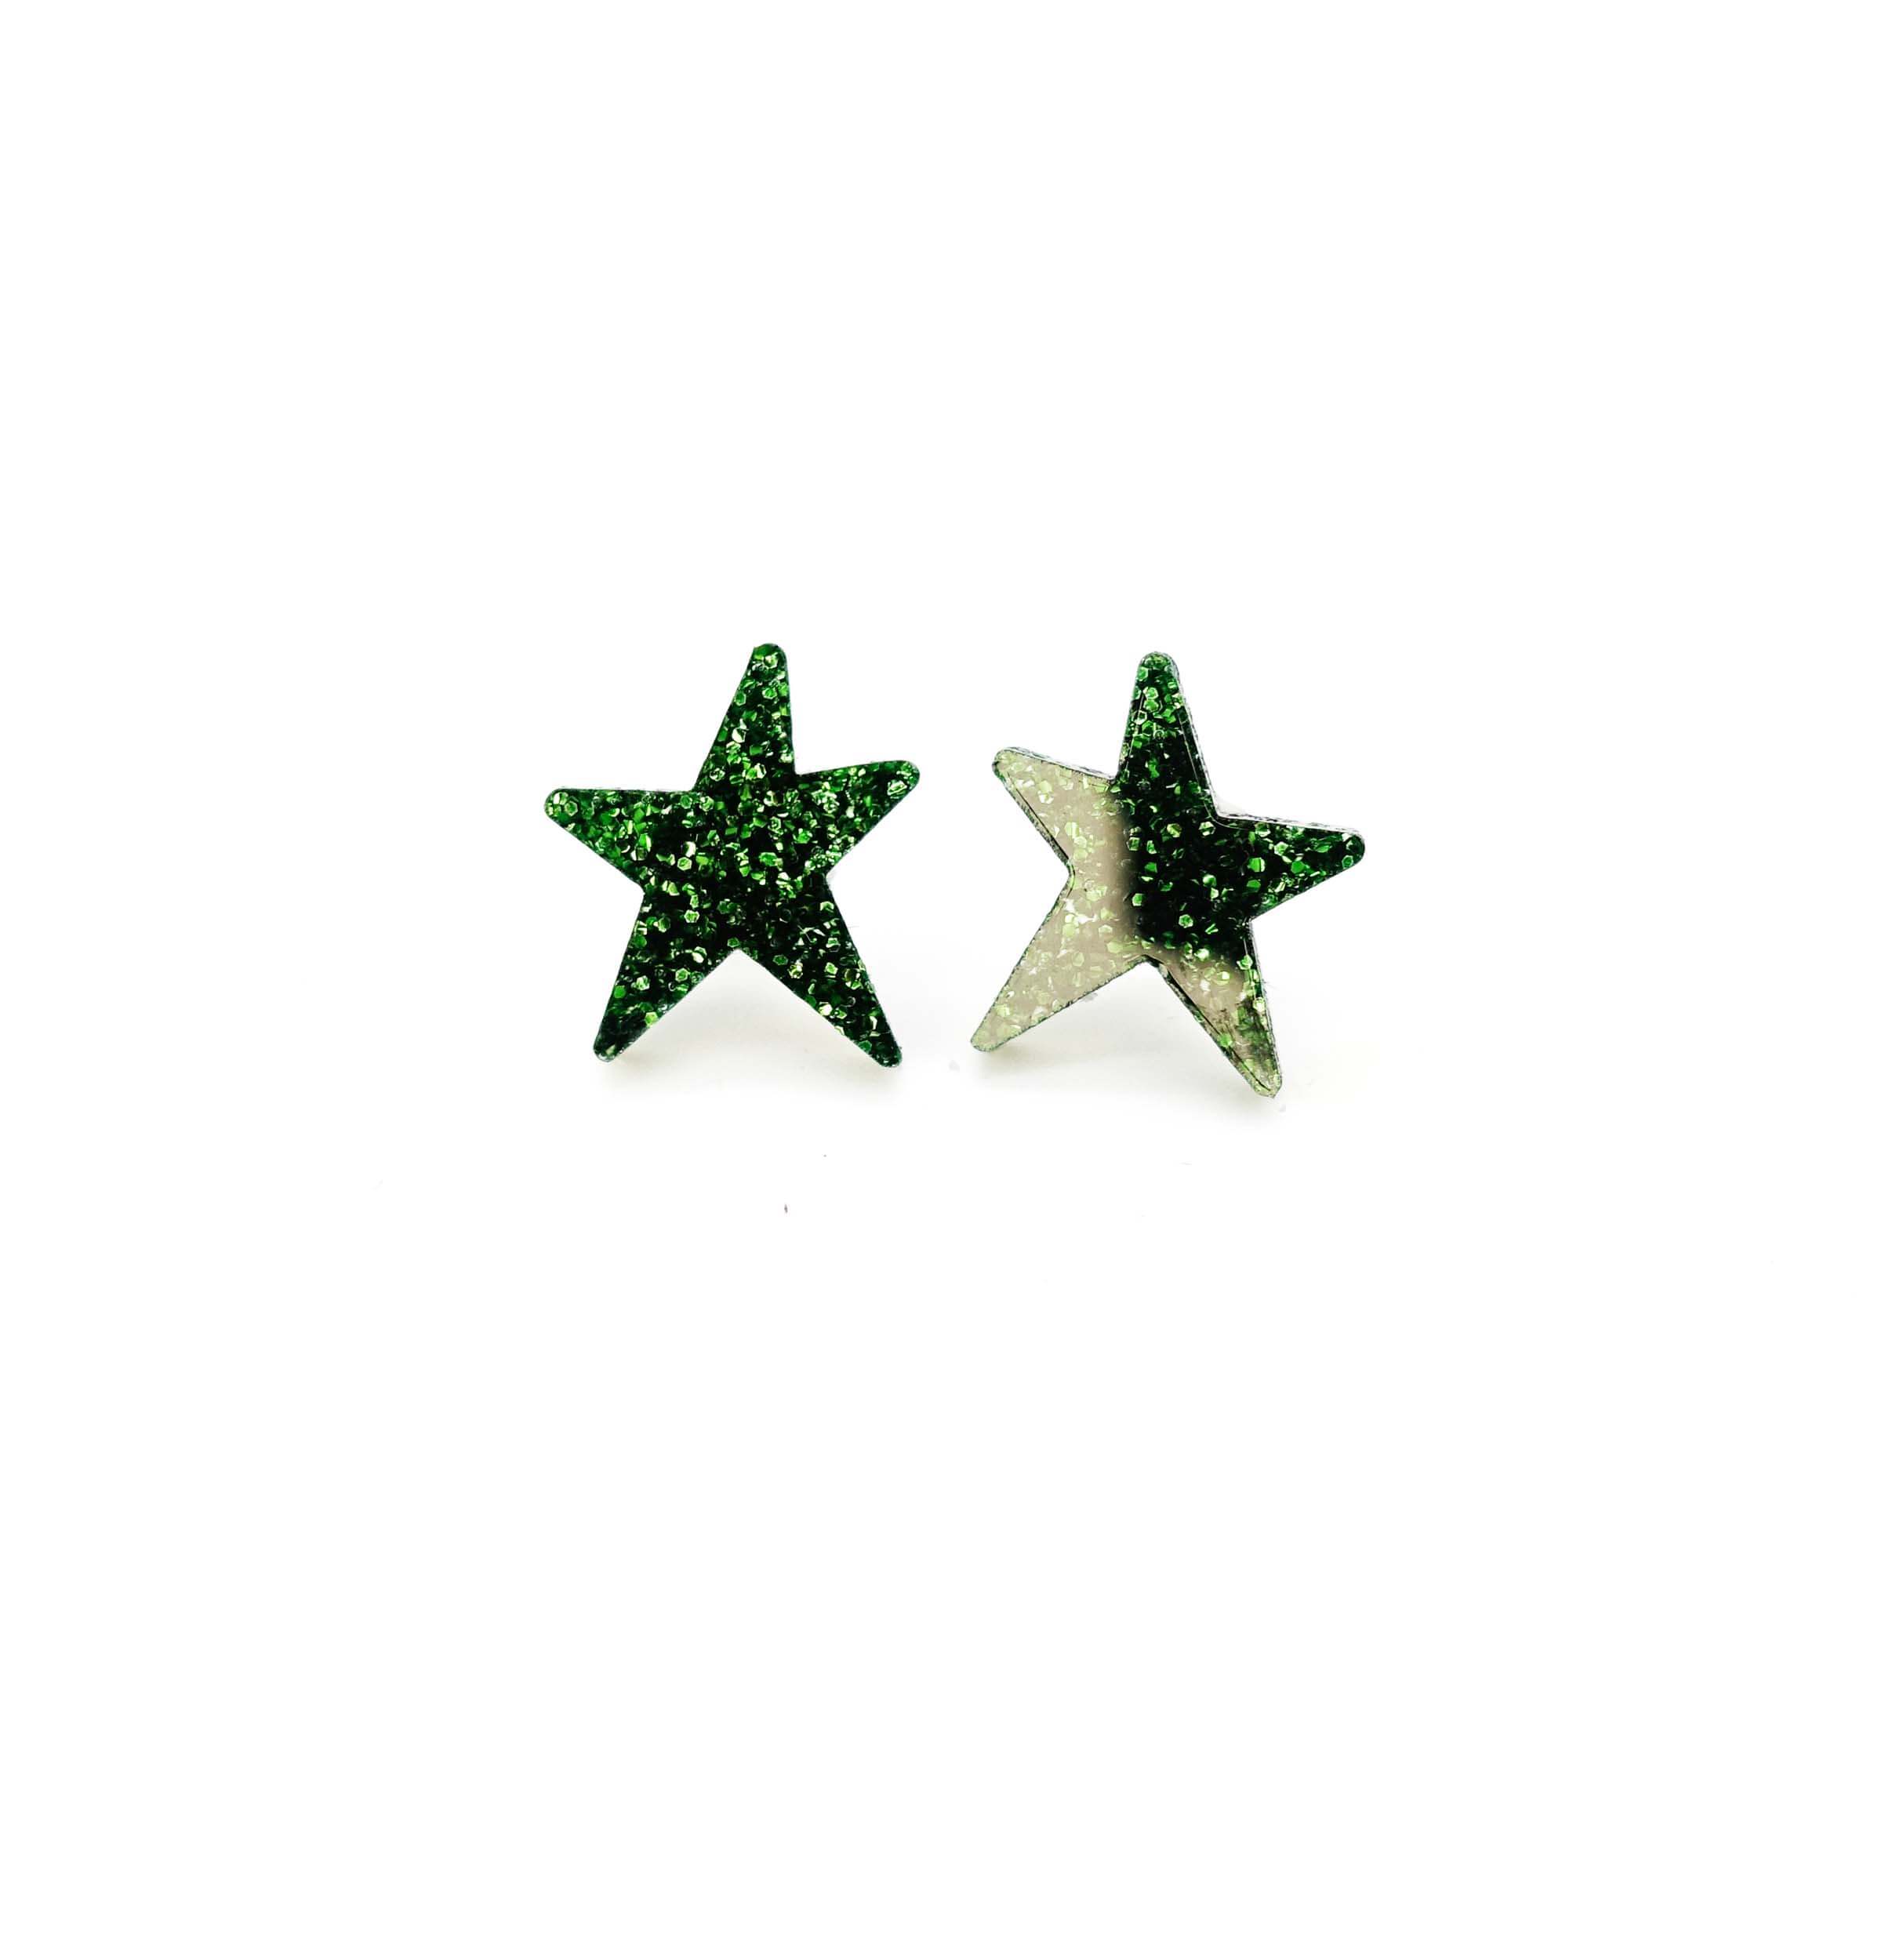 Moss glitter funky Wear and Resist star earrings shown on a white background. 